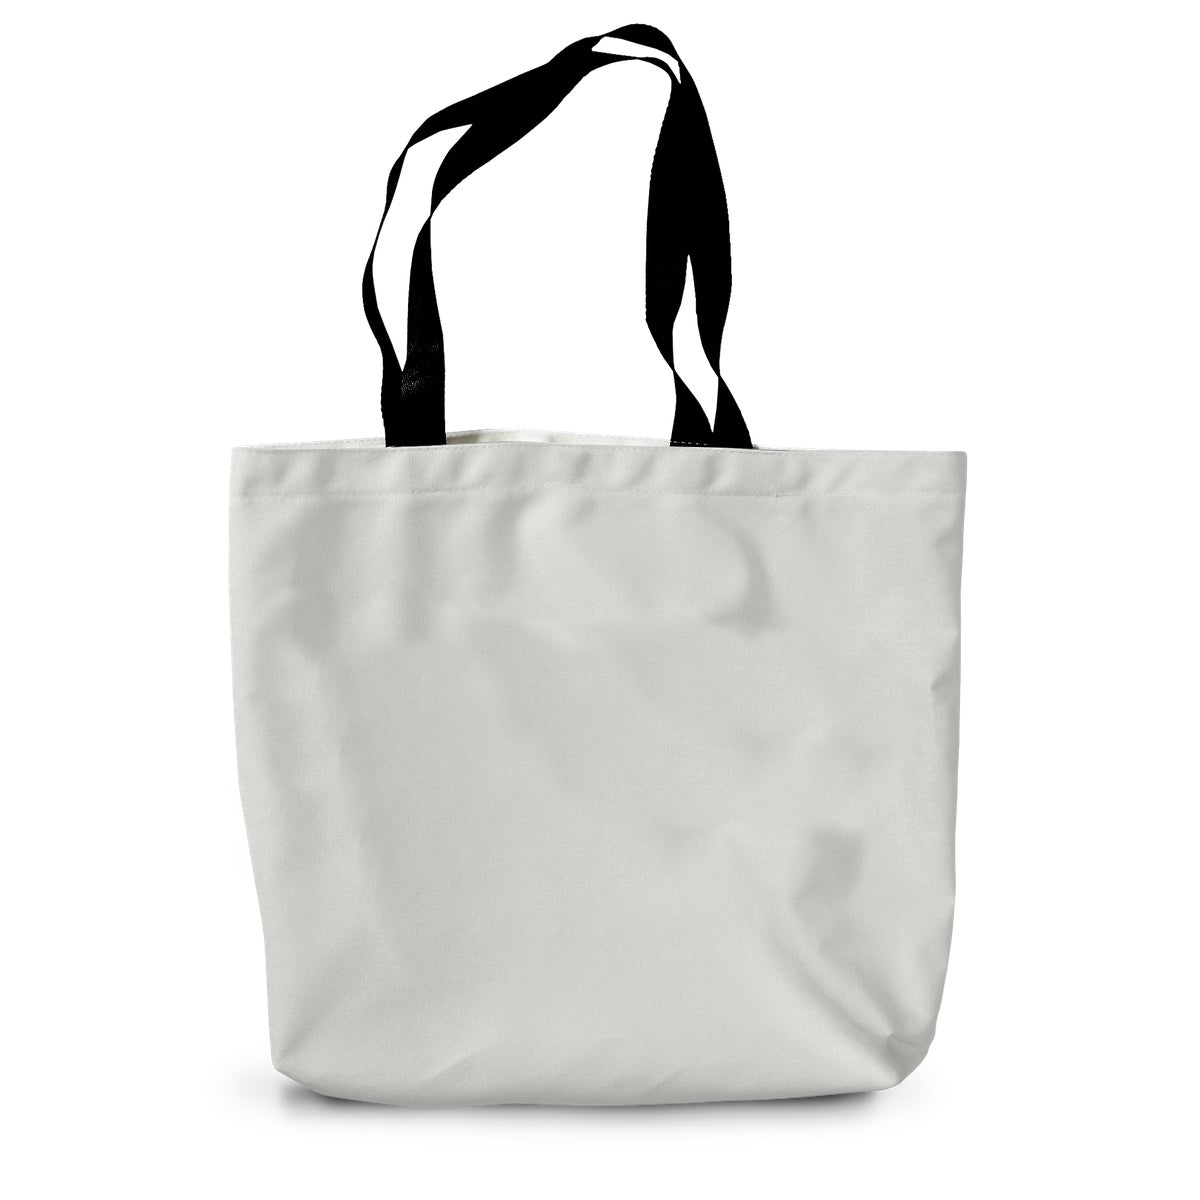 For All Ferretkind Canvas Tote Bag